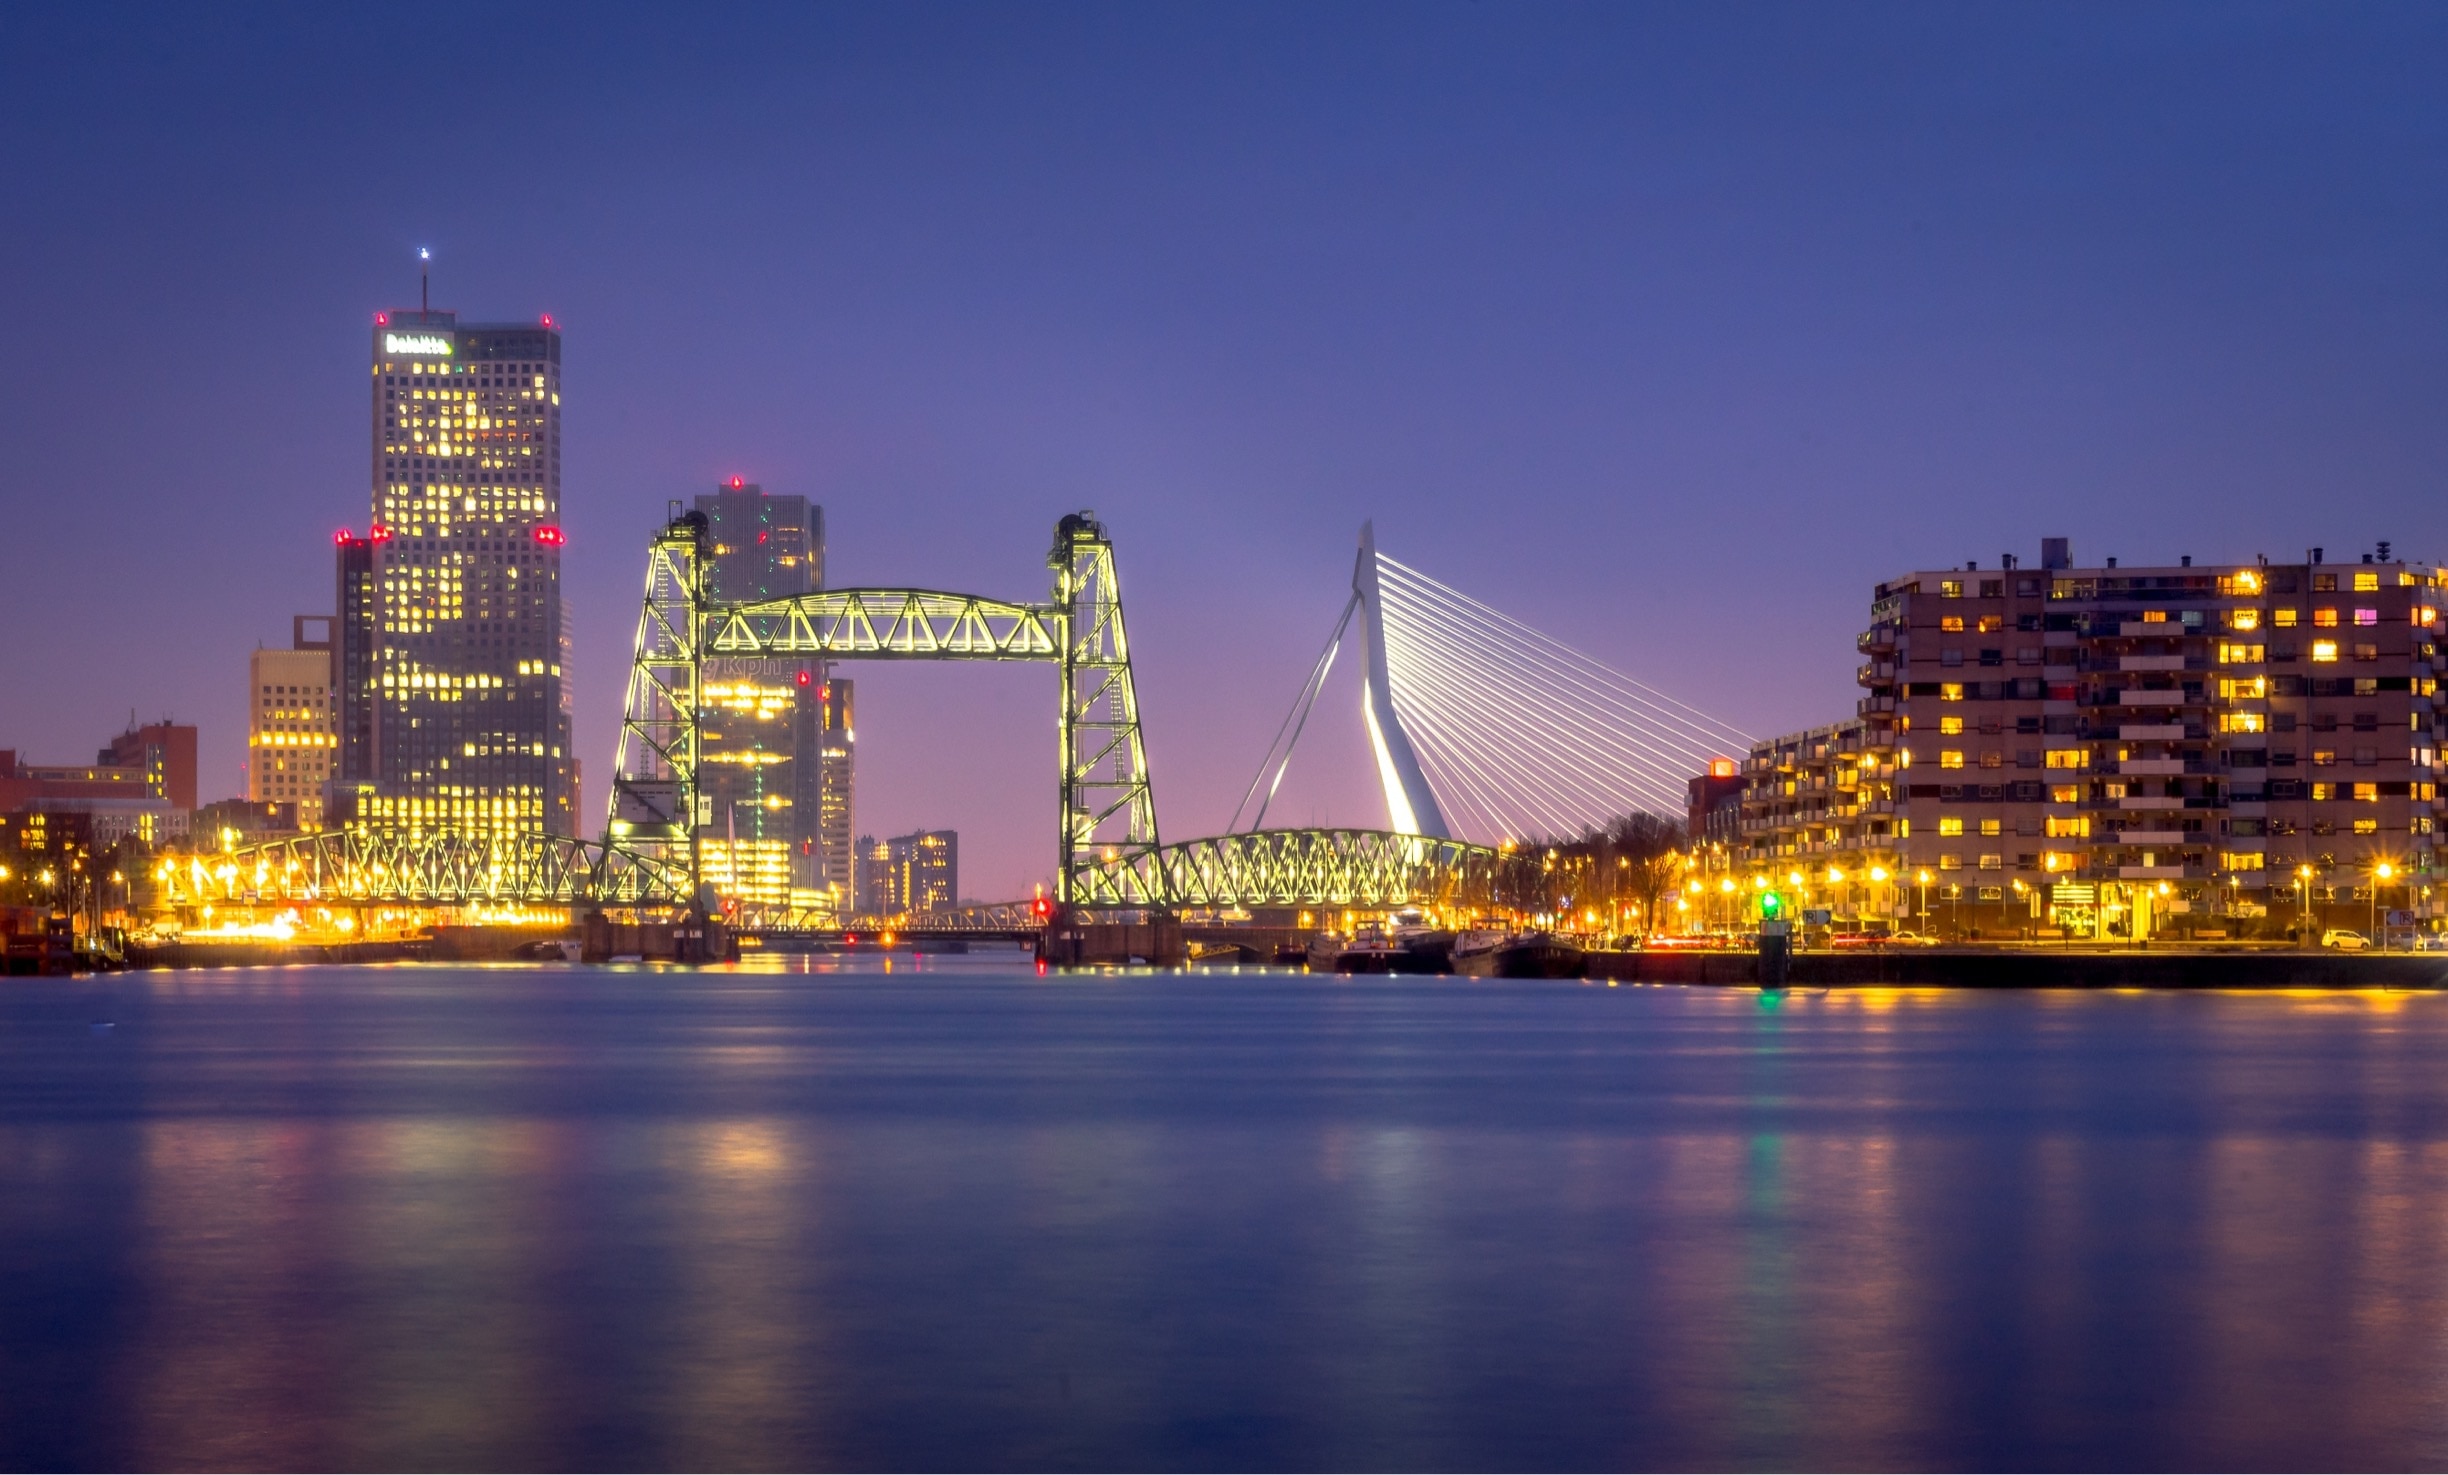 Rotterdam at night

JUST FOLLOW THE PIN TO GET THERE 📌
⬇️⬇️ Make my day and follow me also at: ⬇️⬇️
https://www.instagram.com/mistermirrorless/
https://www.facebook.com/dennisdondersphotography/
https://500px.com/dennisdonders
www.flickr.com/photos/denniskuh1896